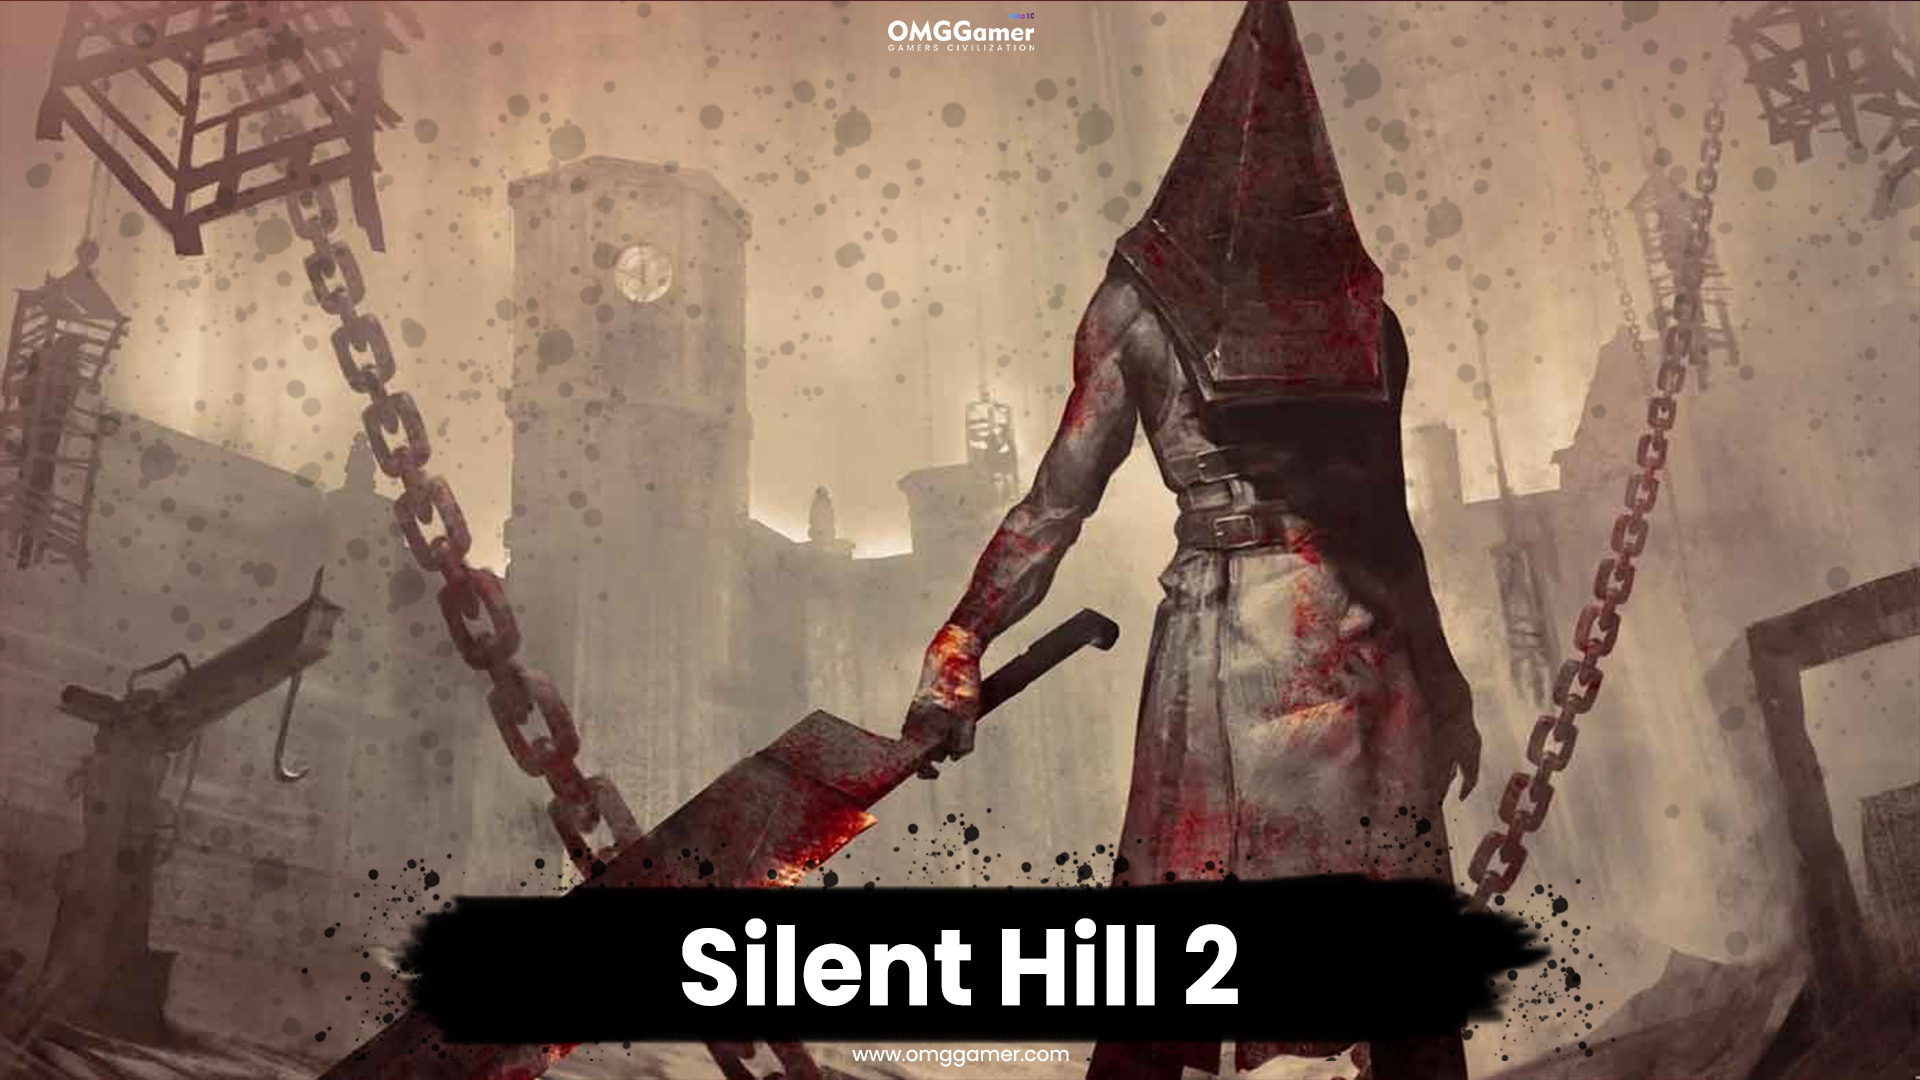 Silent Hill 2 Release Date, Trailer, Gameplay, Story & Rumors